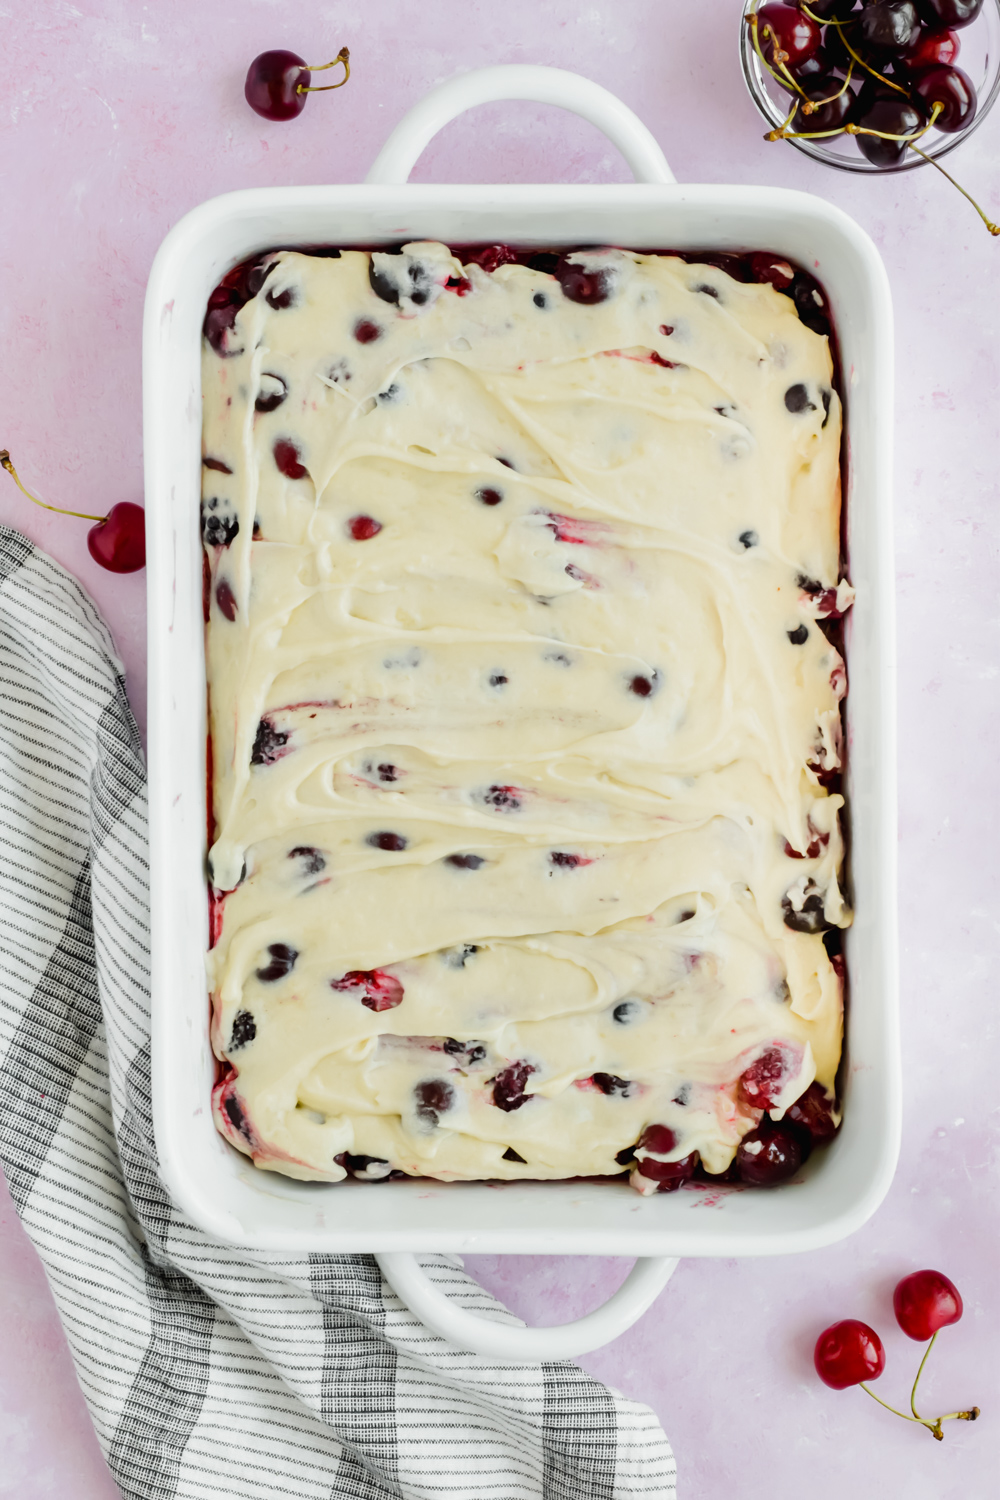 mixed berries and cherries in white baking dish topped with biscuit batter before baking.